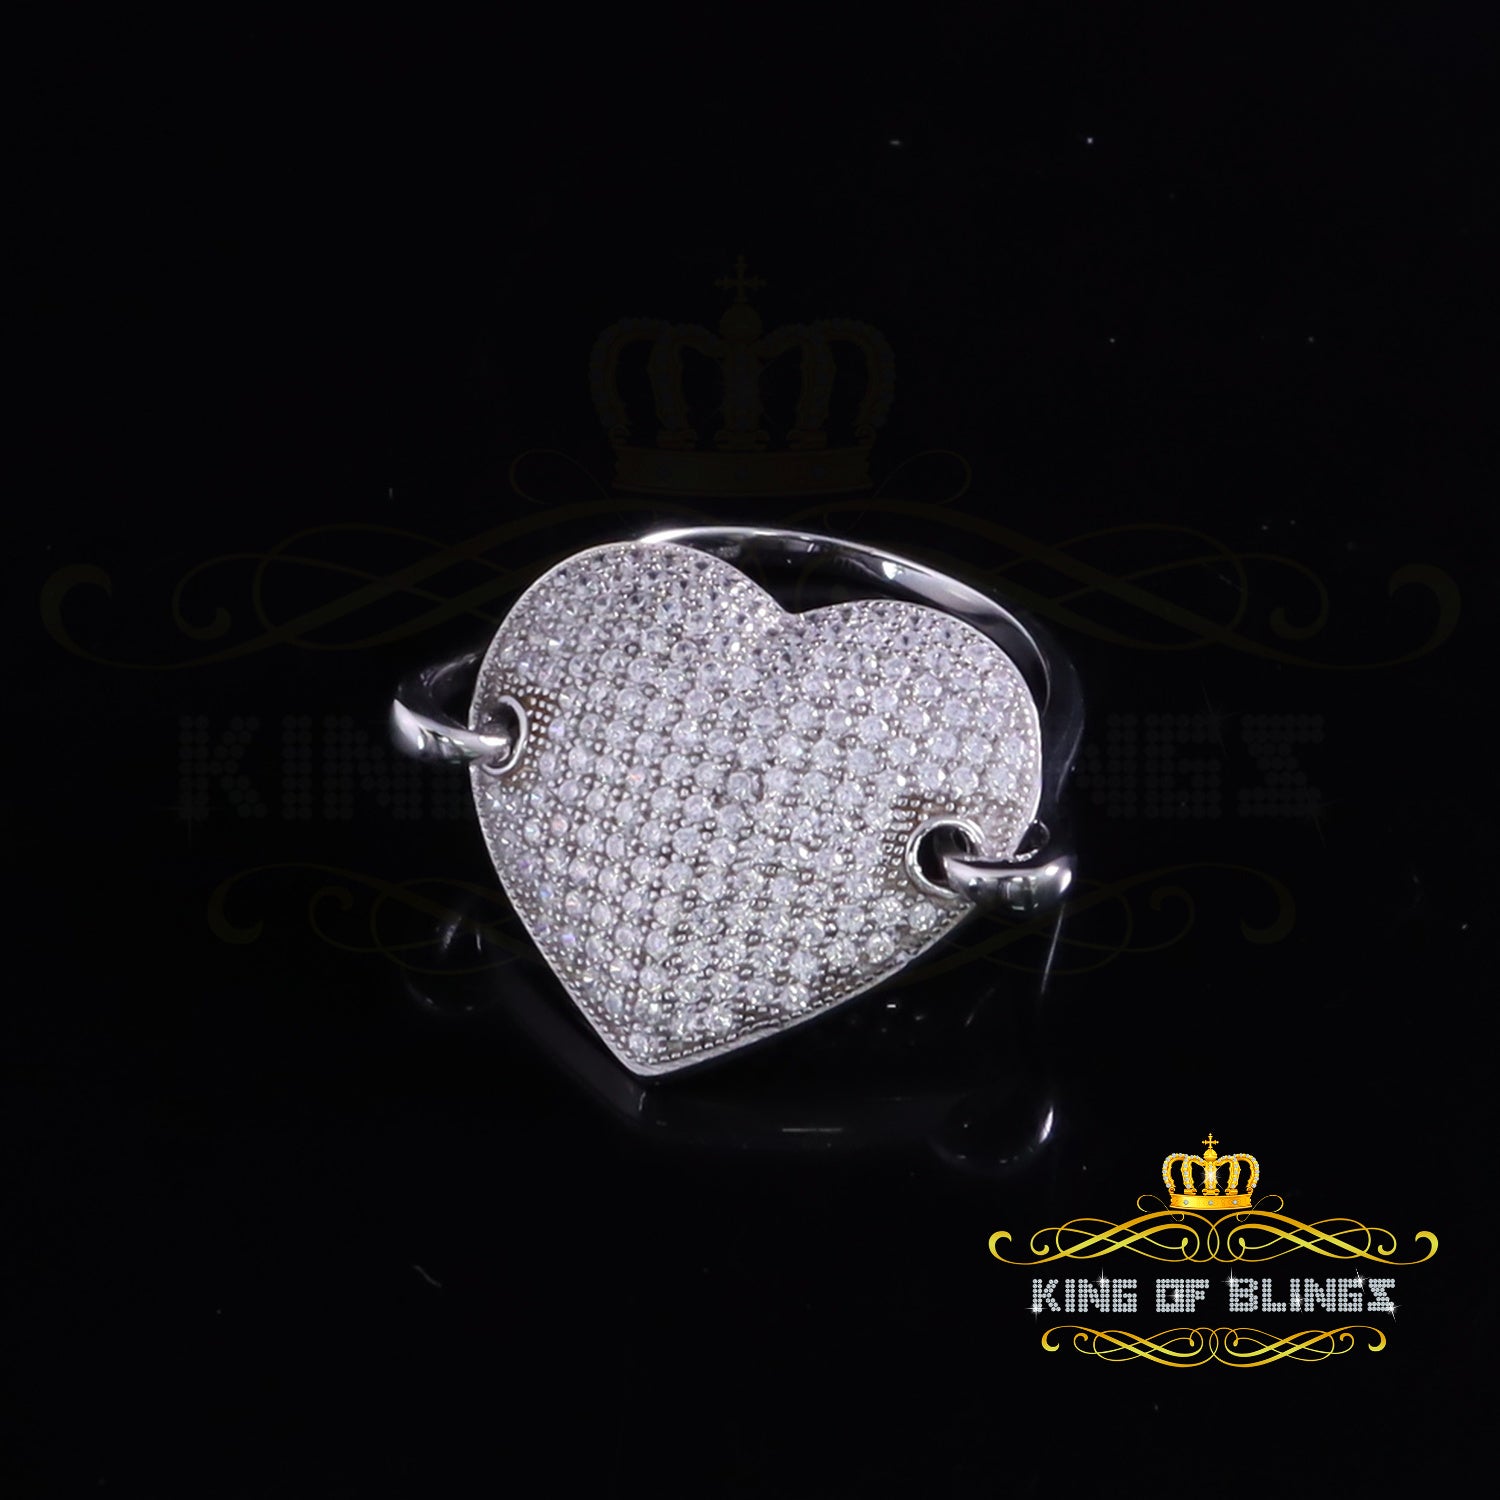 King Of Bling's925 Silver Round Shape Stone White Heart Ring Size 7 Womens 100 Cubic Zirconia KING OF BLINGS